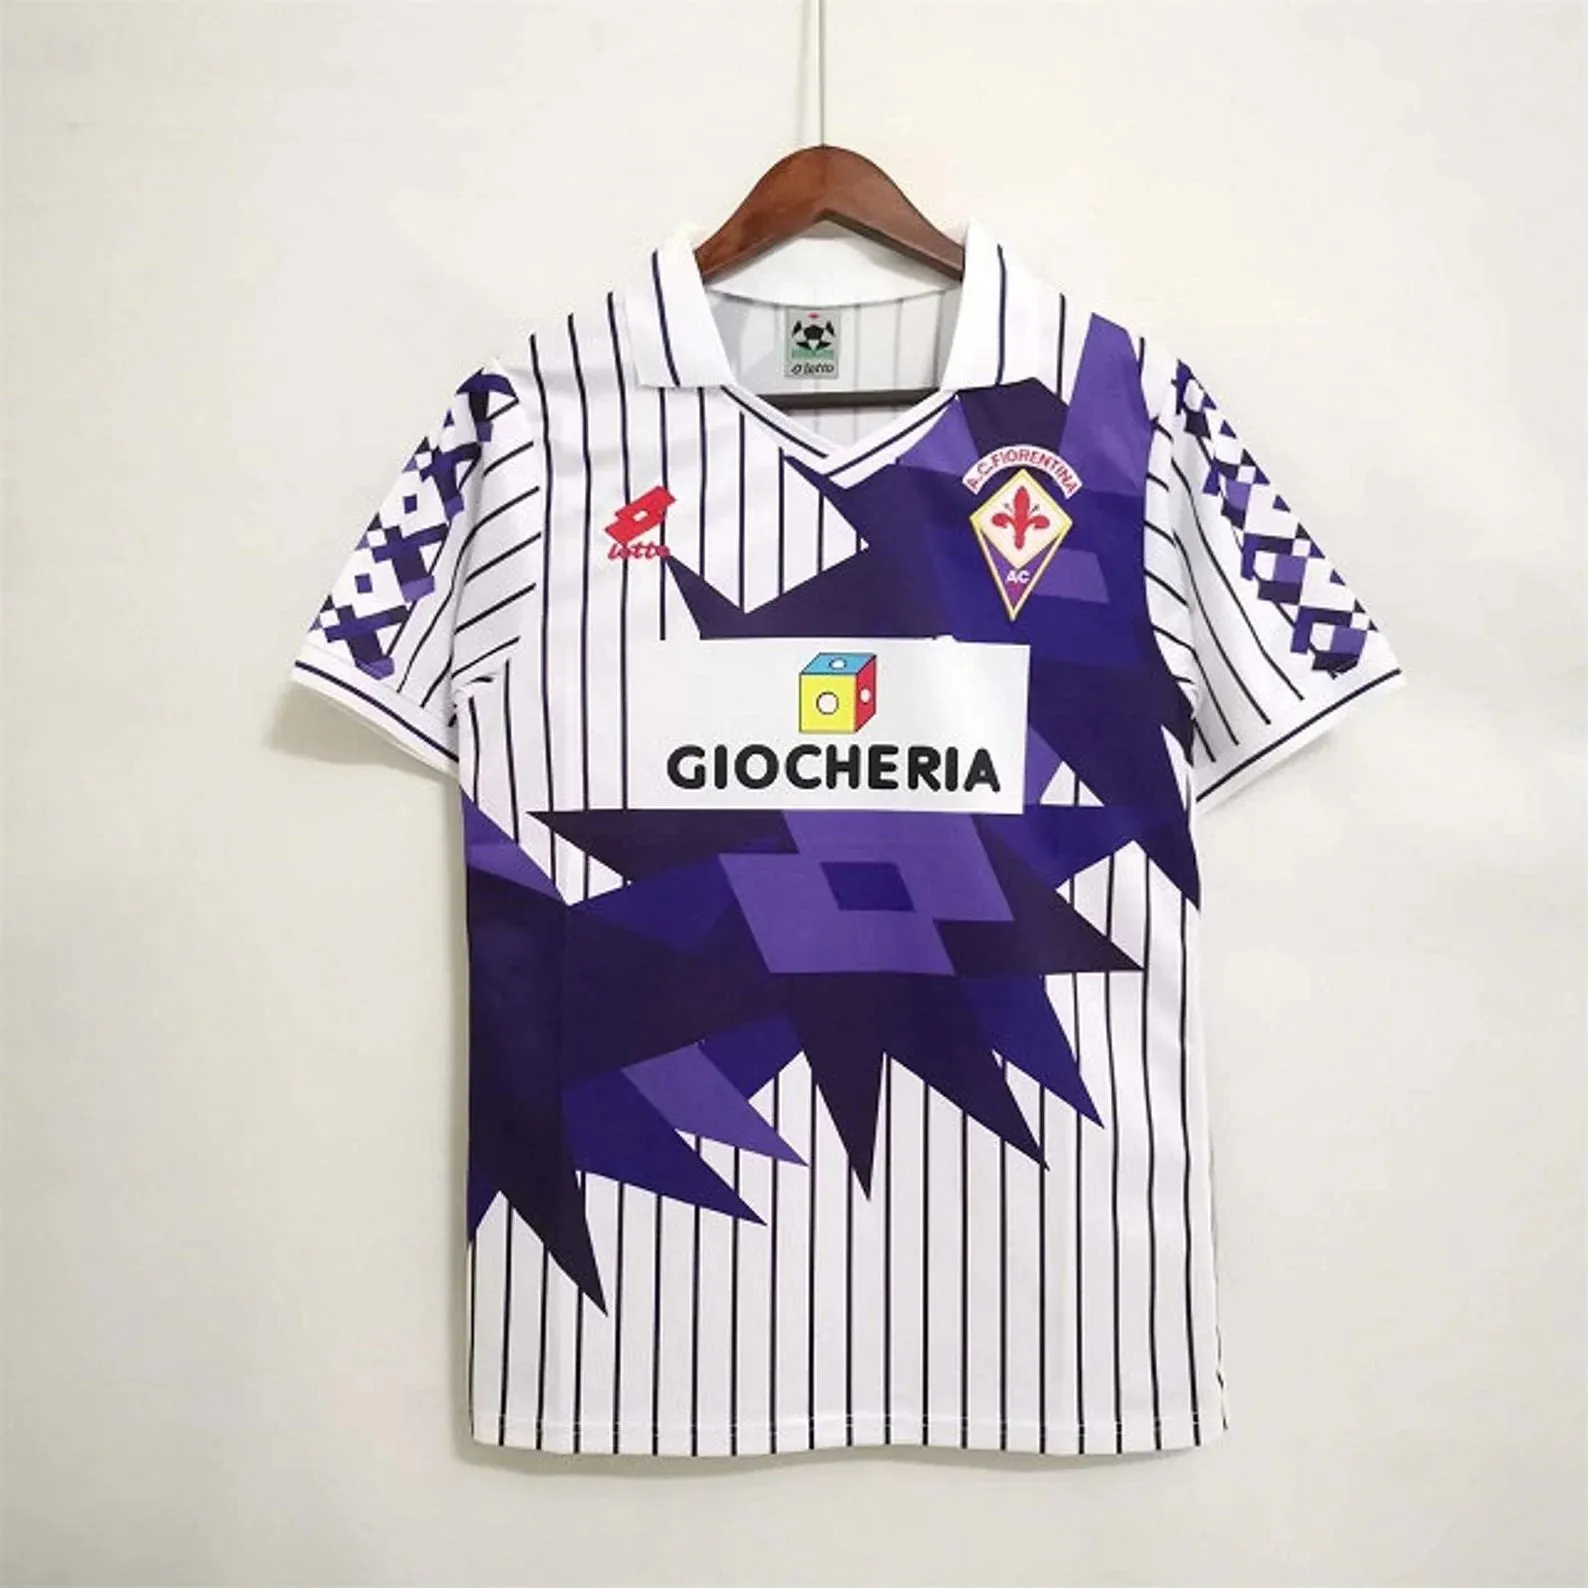 Reliving Fiorentina's Golden Era: A Deep Dive into the 1991/1992 Away Retro Jersey on Porttore